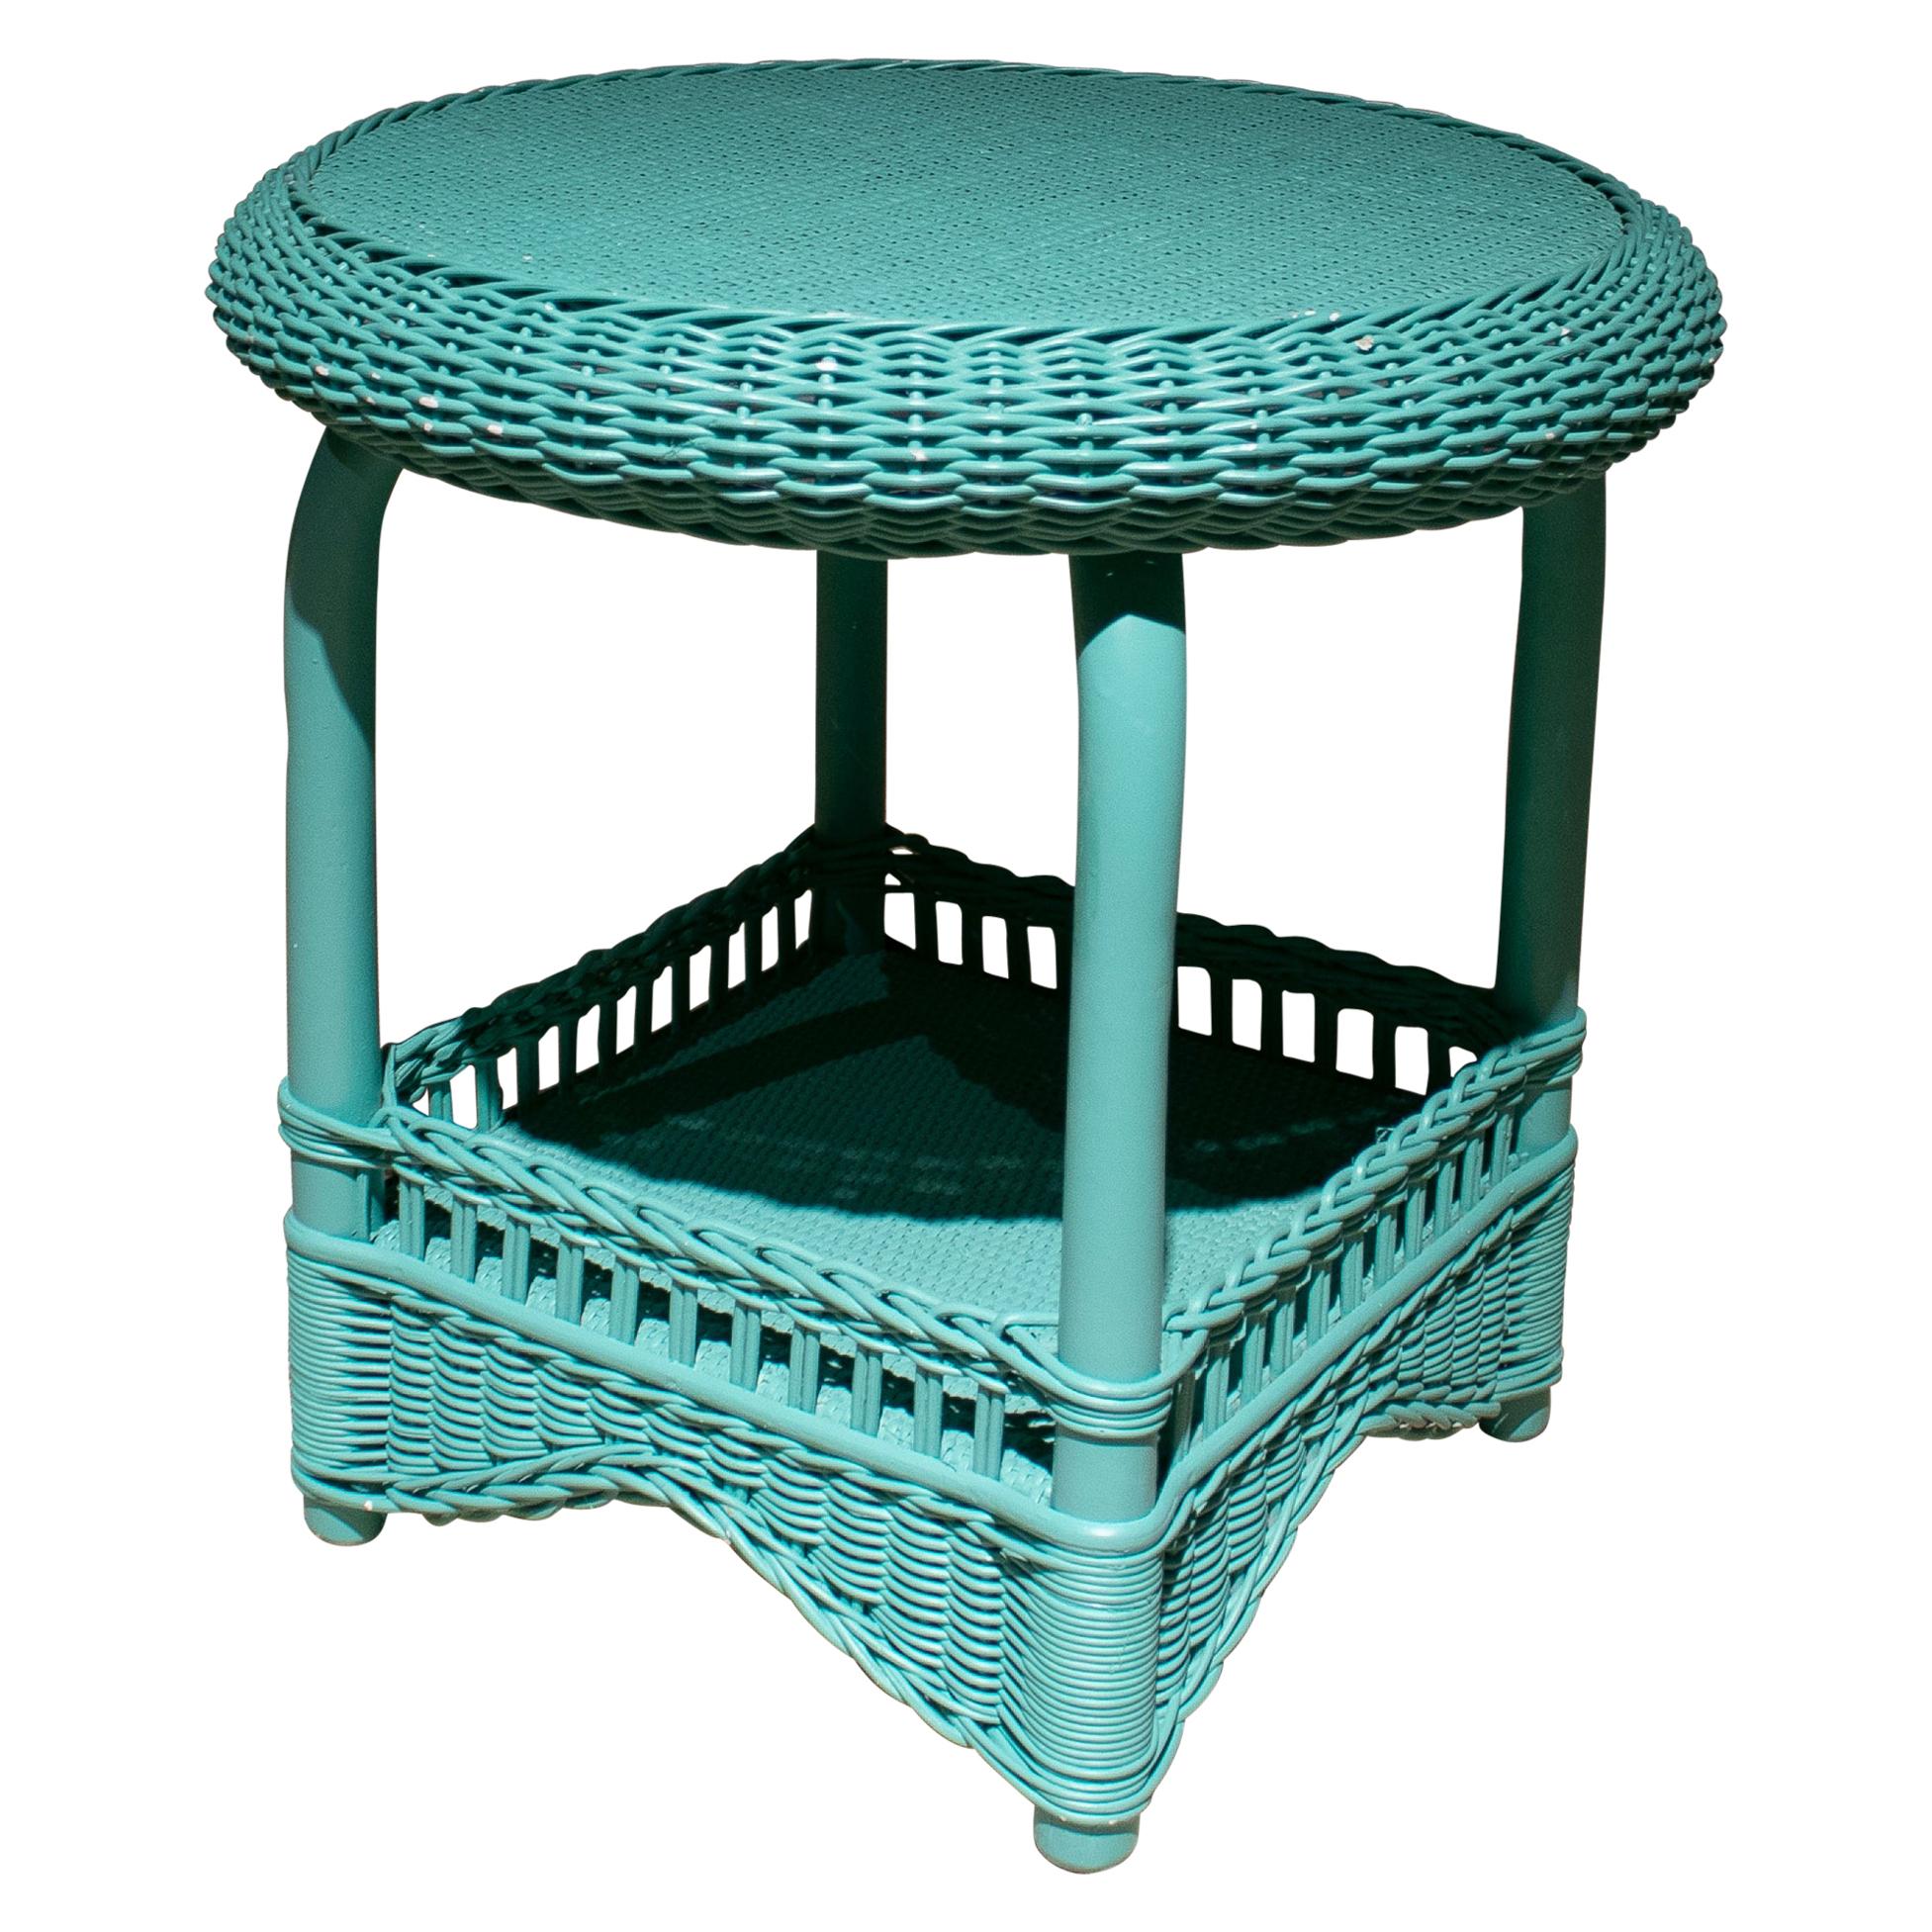 1980s Spanish Turquoise Hand Woven Wicker Round Side Table